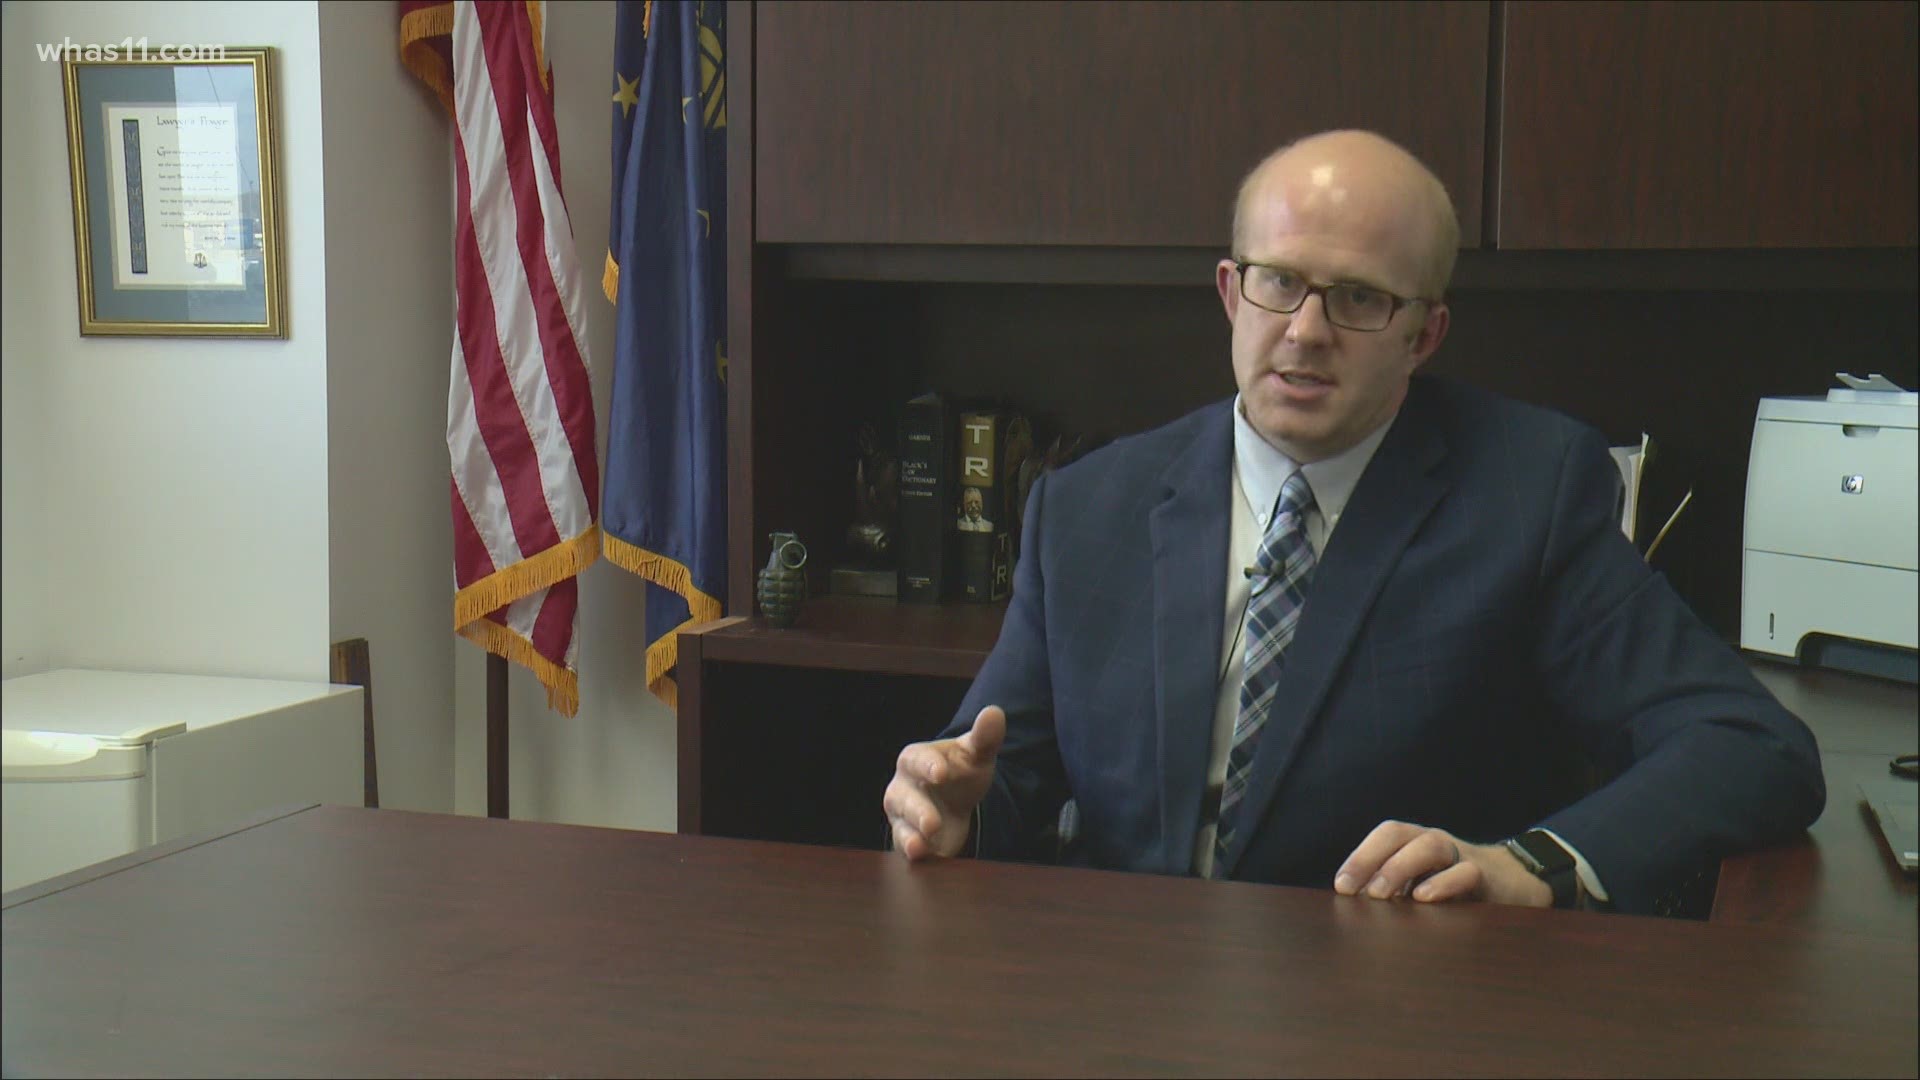 Harrison County Prosecutor Otto Schalk signed up for probation in an attempt to expose the breakdowns plaguing the criminal justice system in his community.